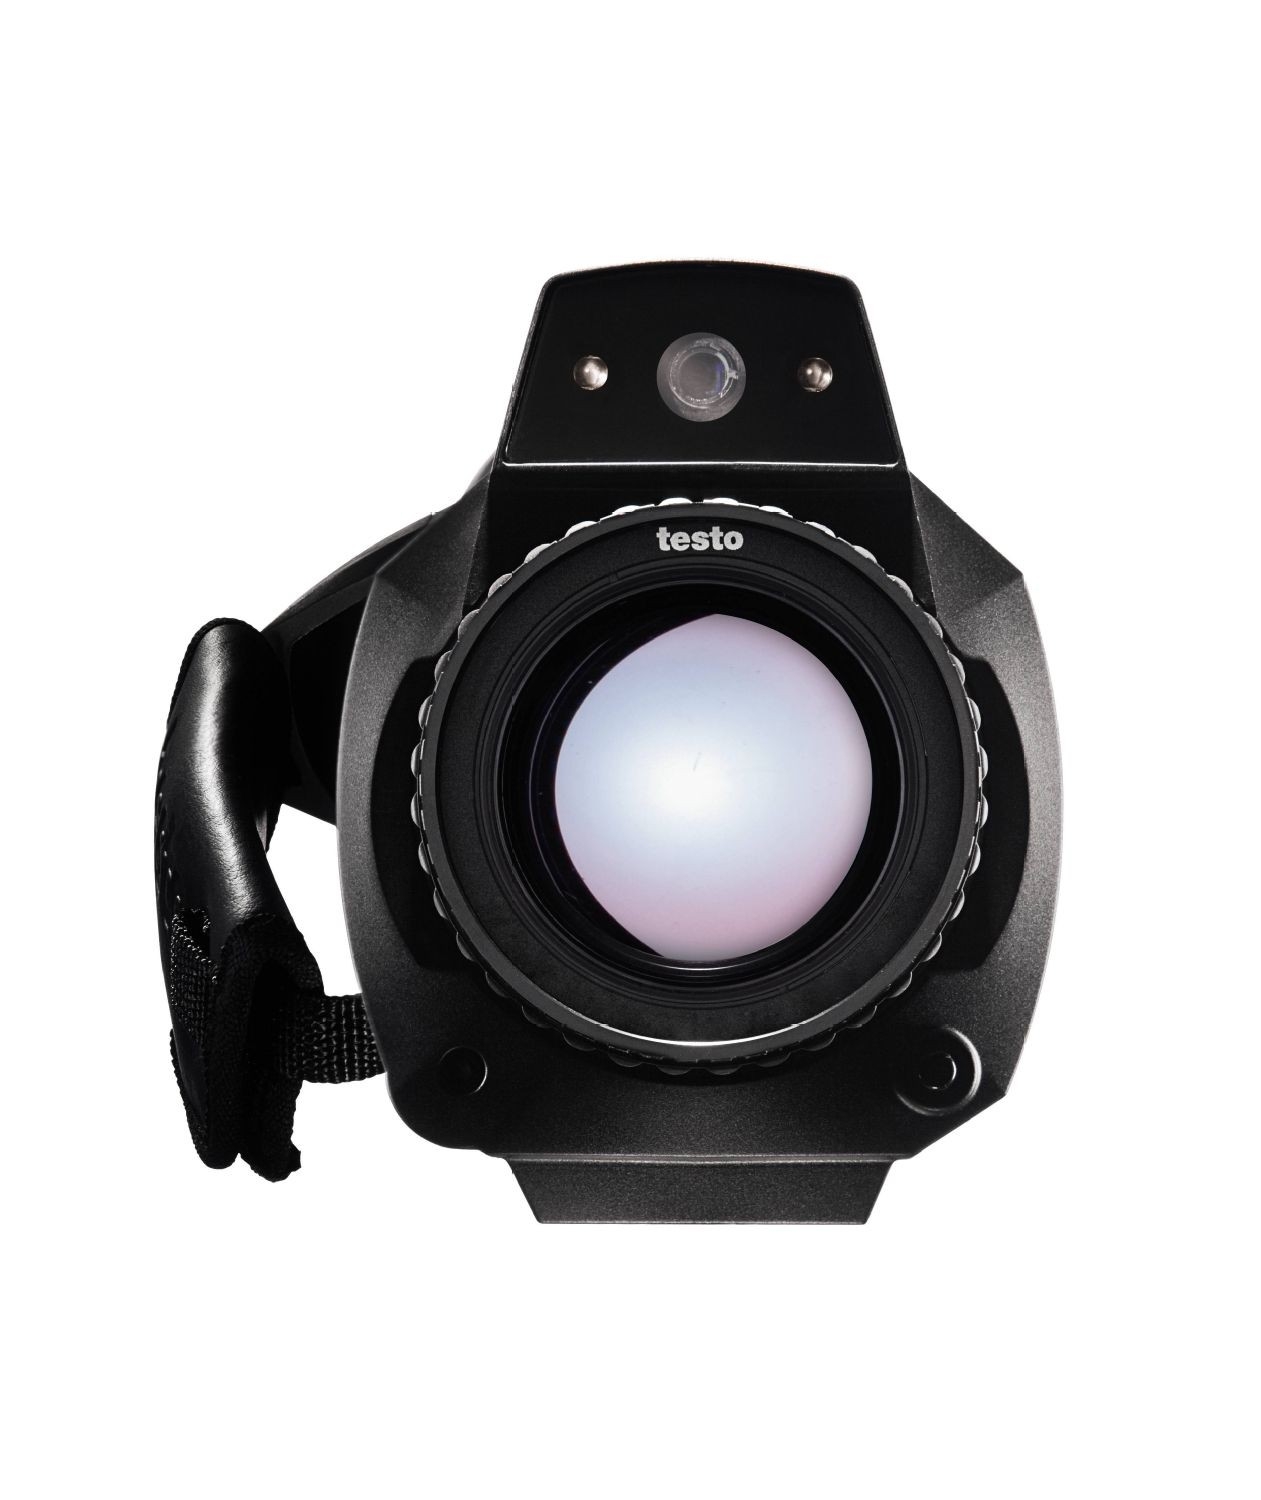 testo 890 thermal imager with super-telephoto lens